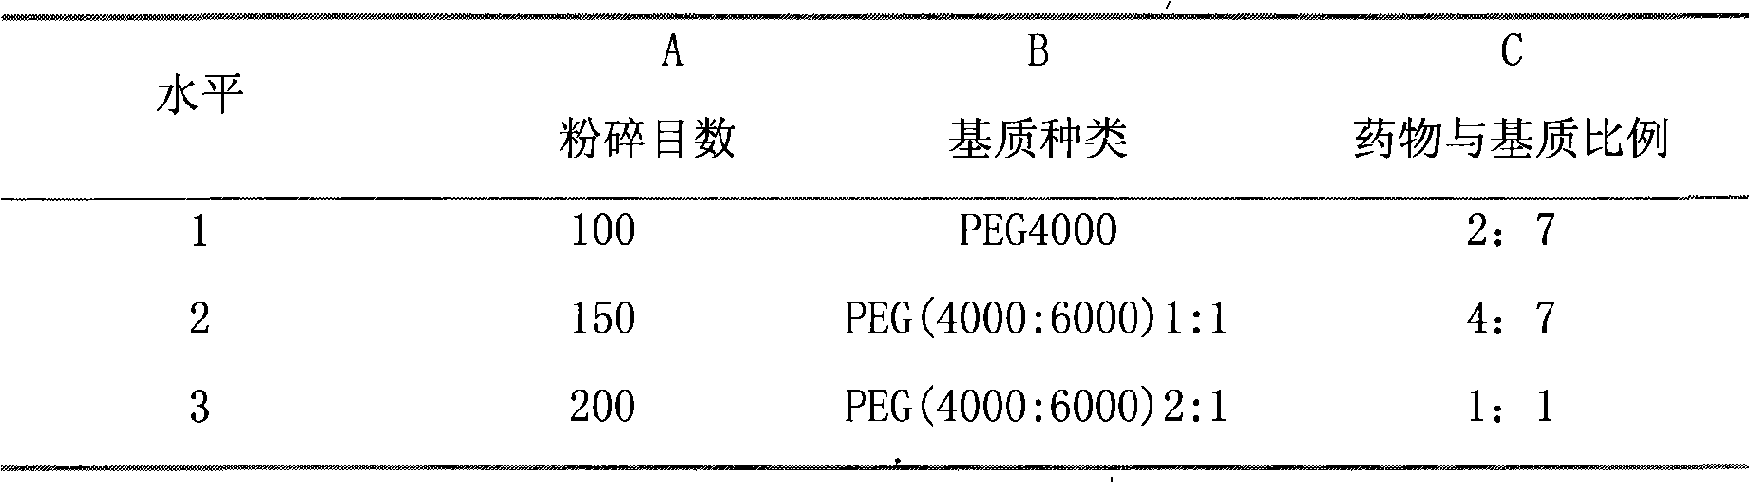 Traditional Chinese drop pills for treating cardiovascular and cerebrovascular diseases and preparation method thereof